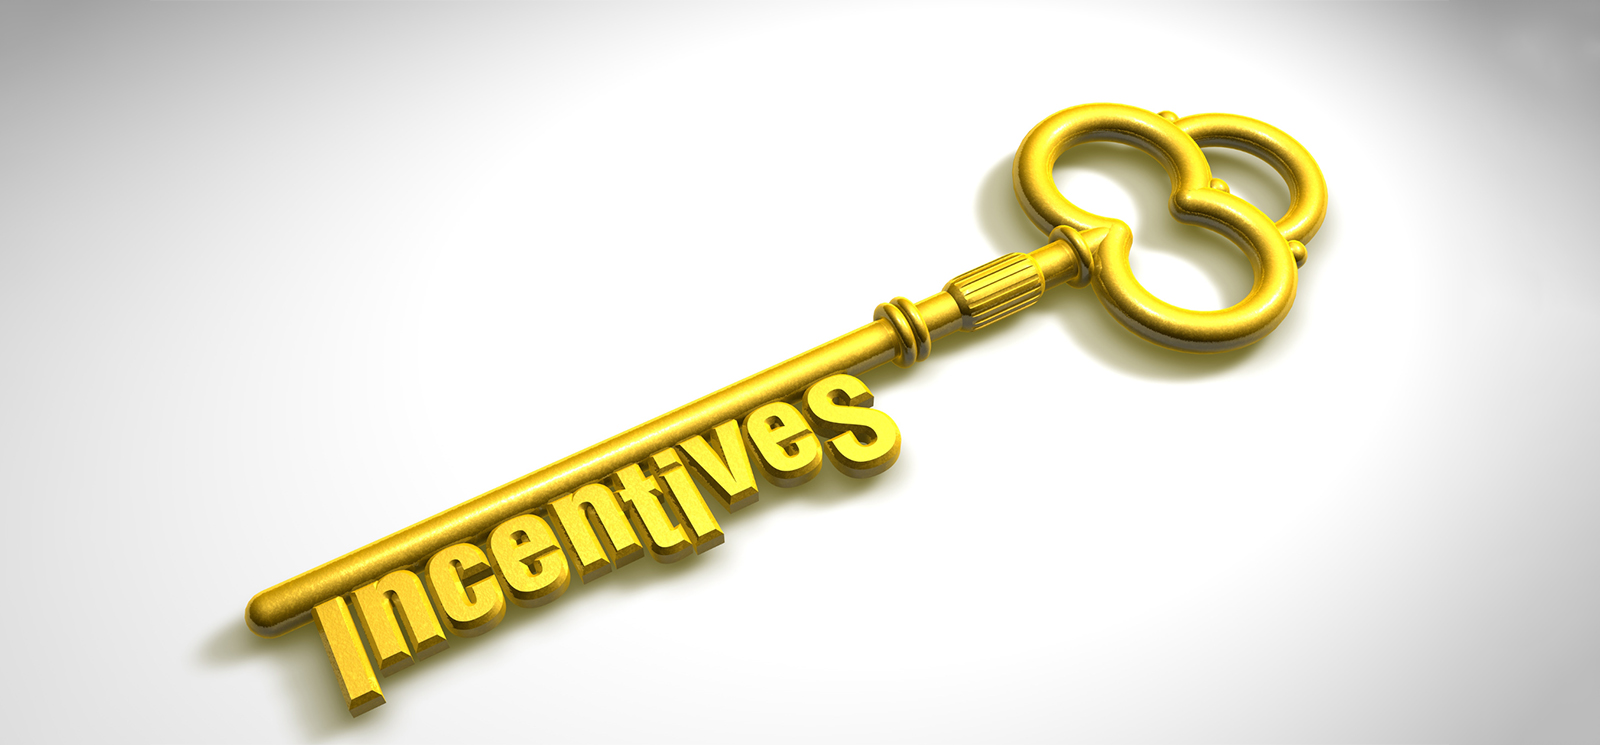 a golden key on a white background with the word incentives written on it